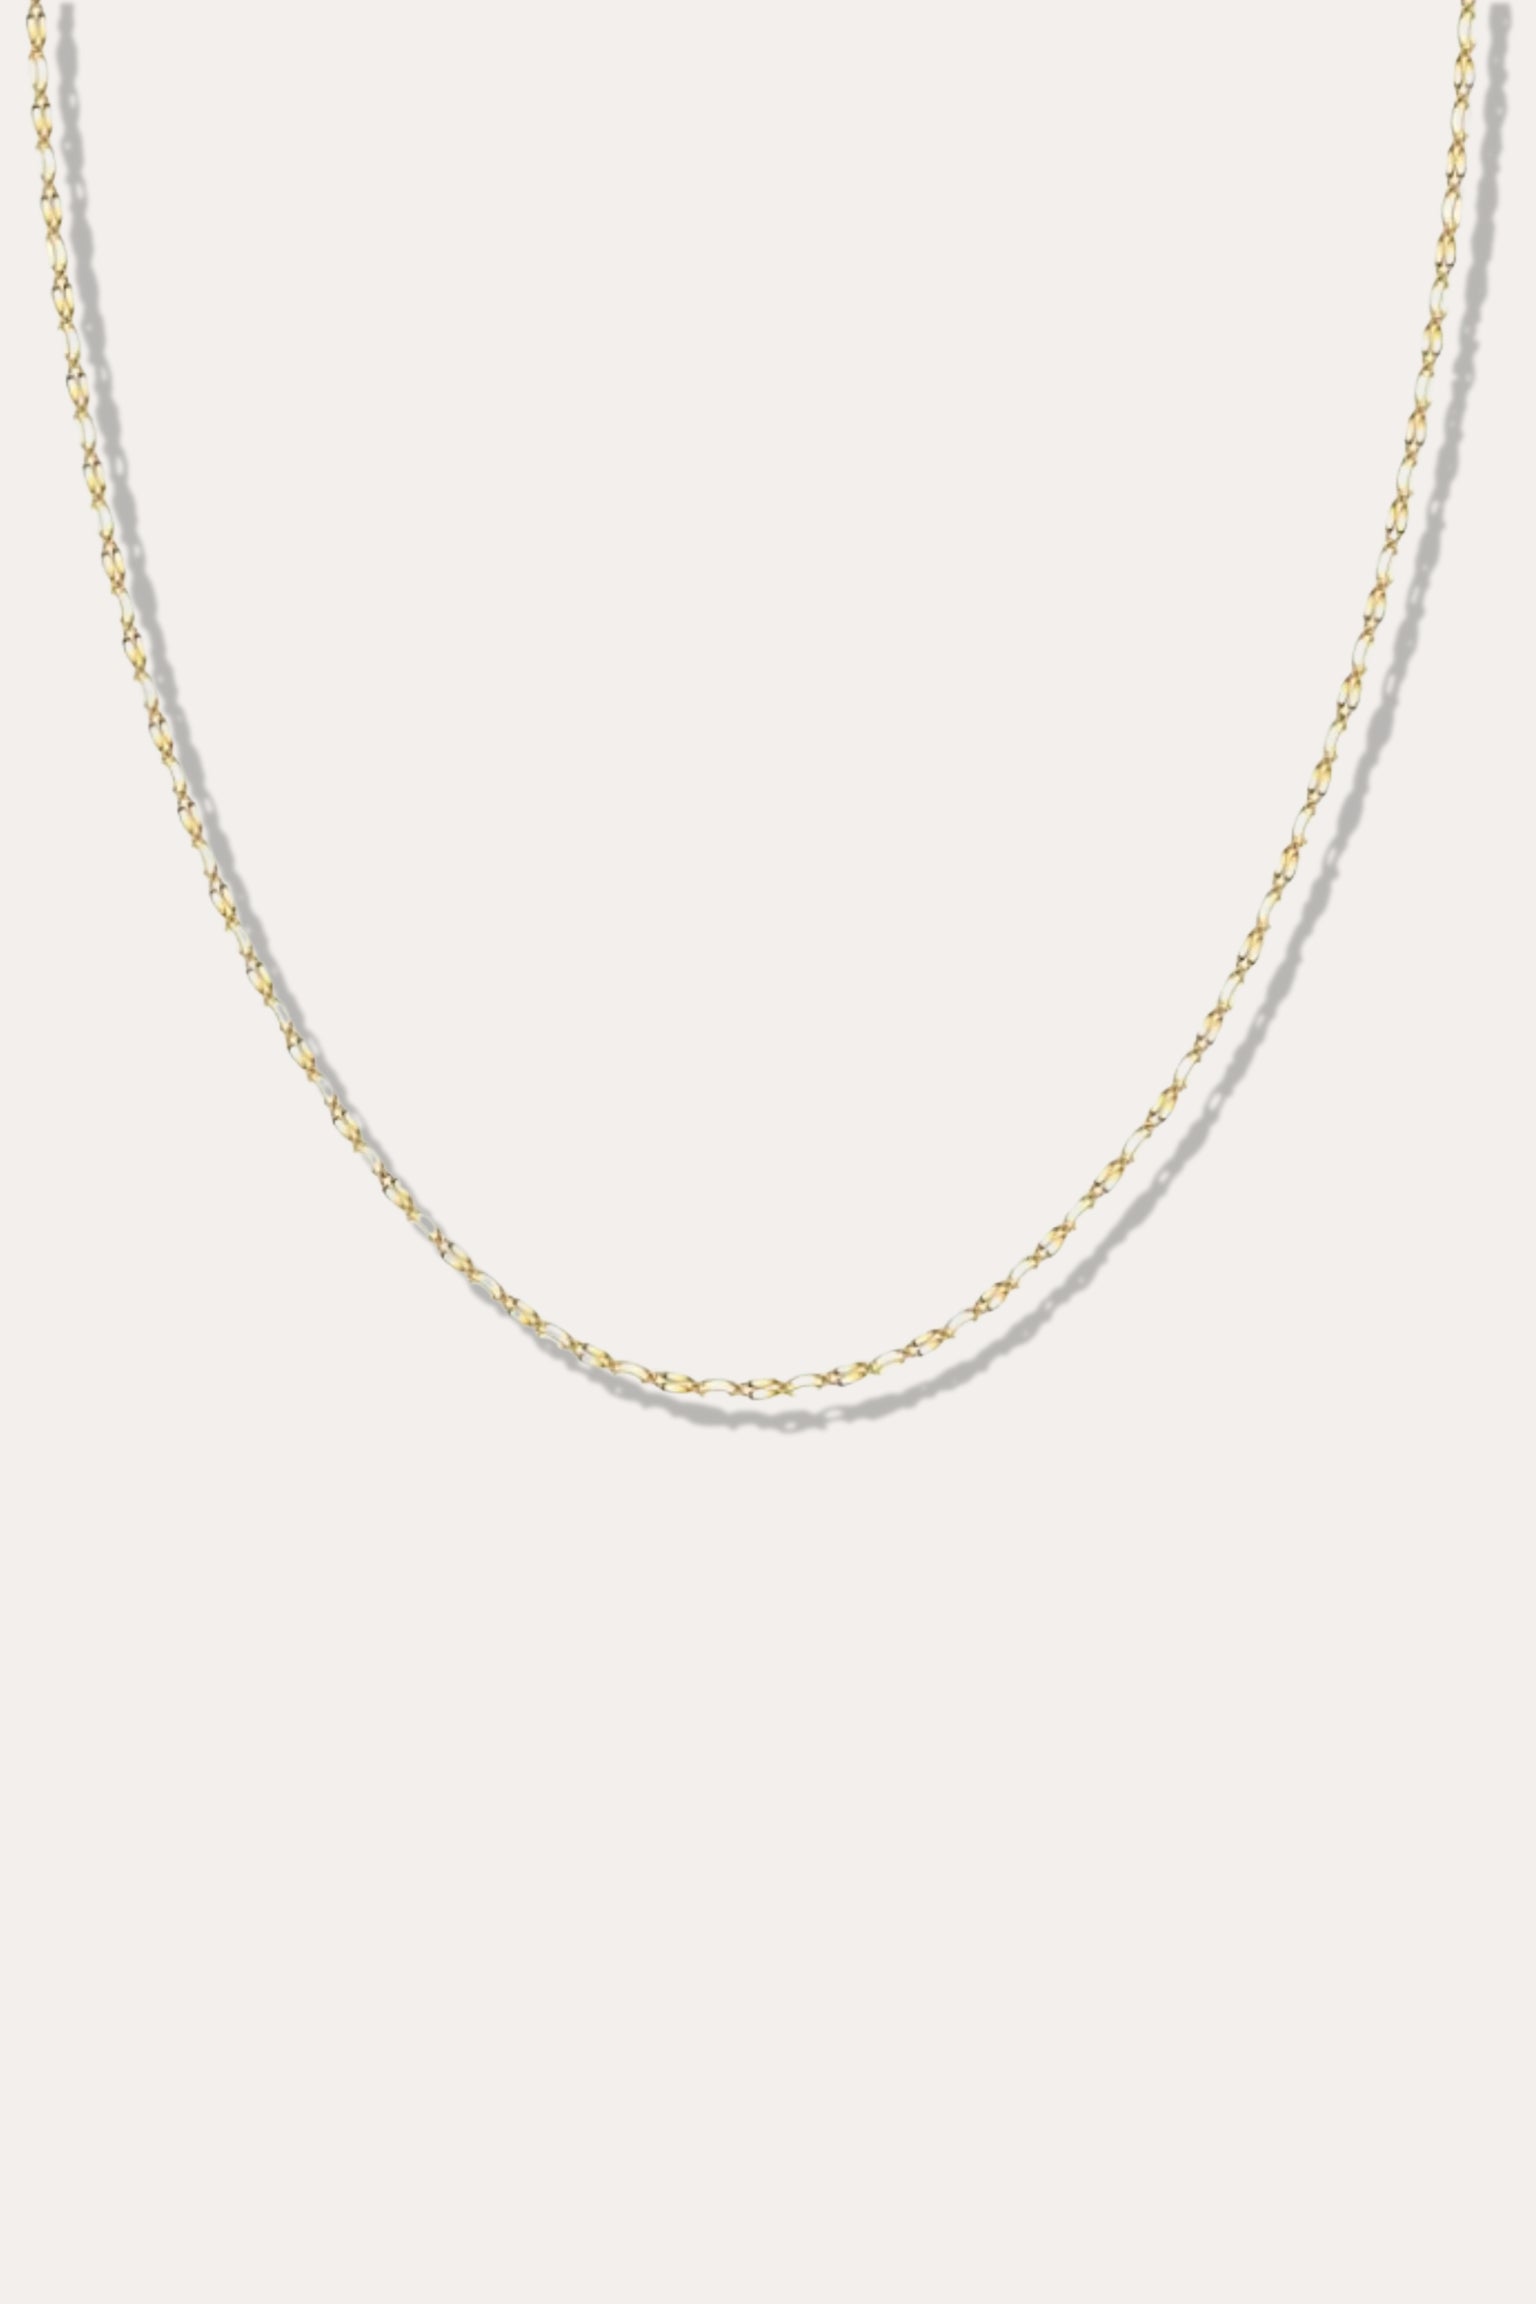 1 mm Stamped Mirror Chain Necklace - 14K Yellow Gold